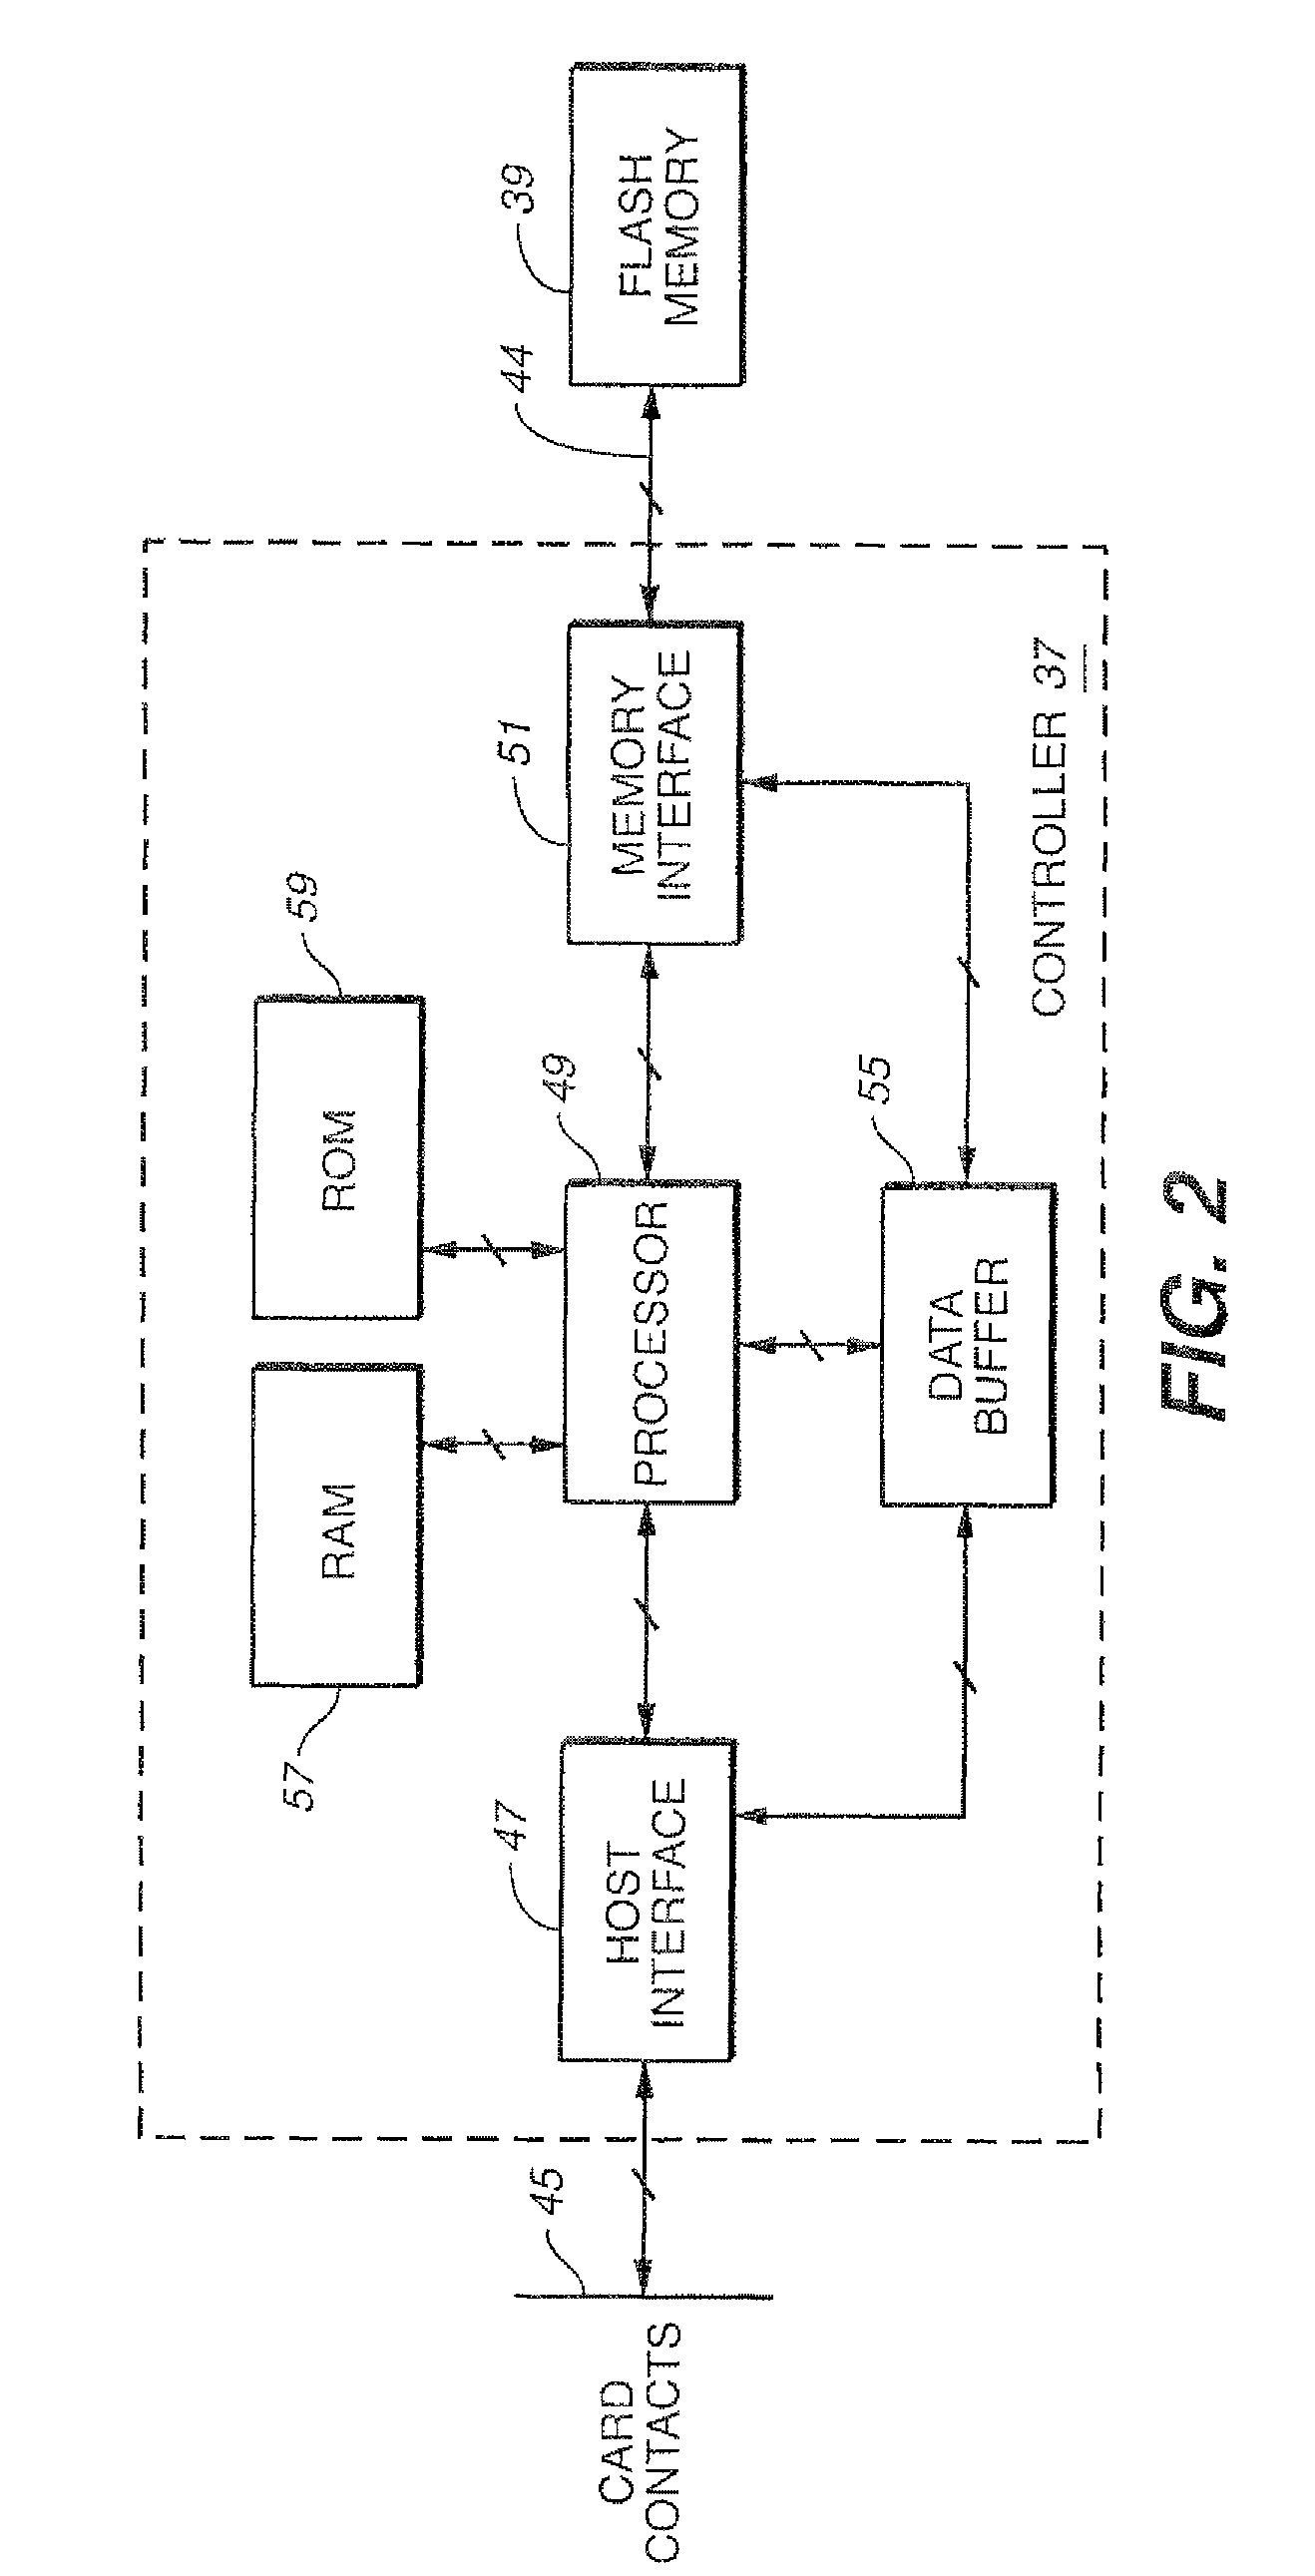 Enhancement of input/output for non source-synchronous interfaces